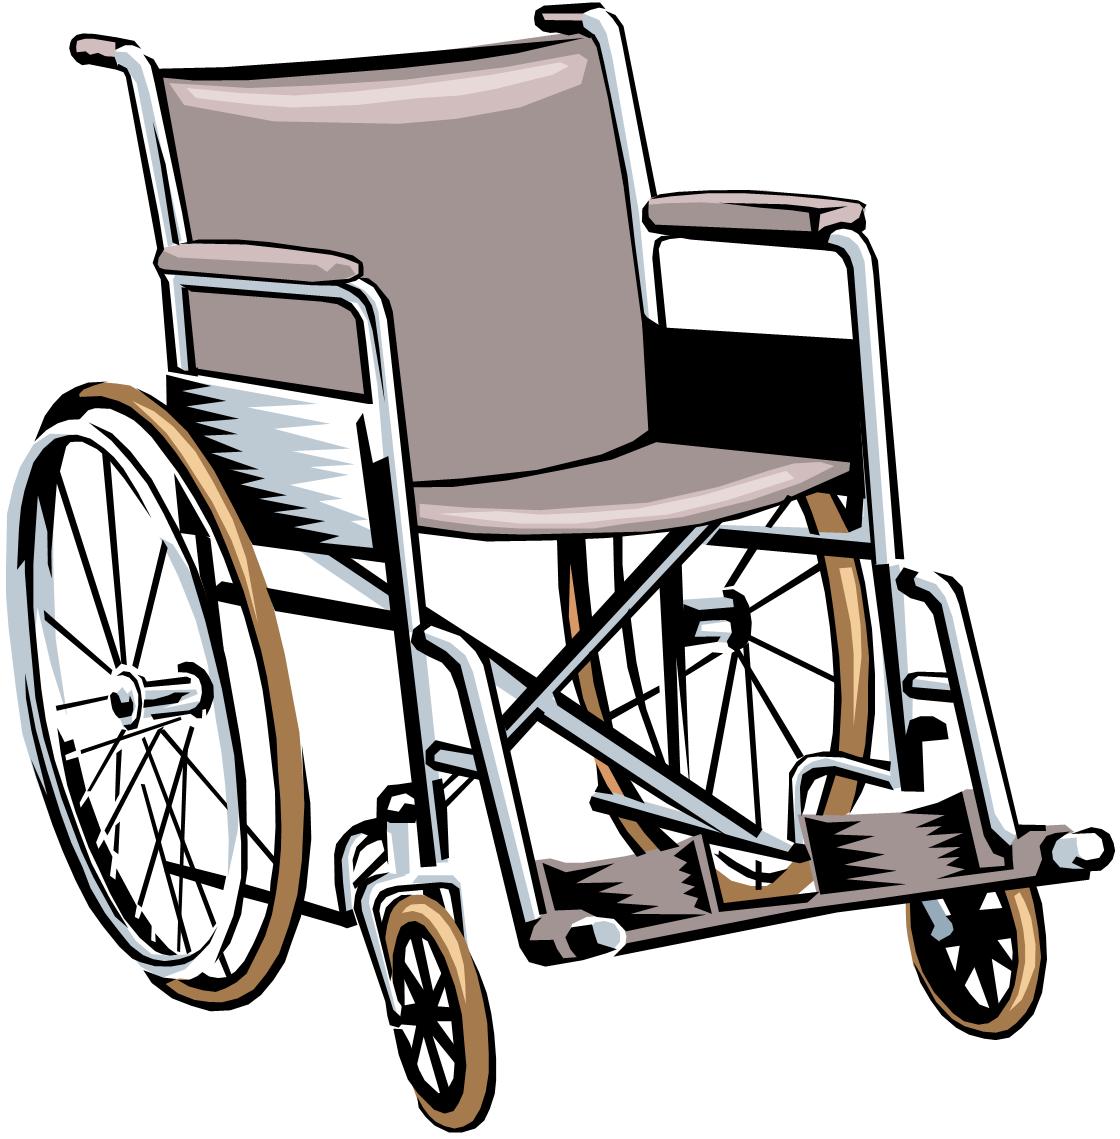 Pictures Of Wheelchairs - ClipArt Best